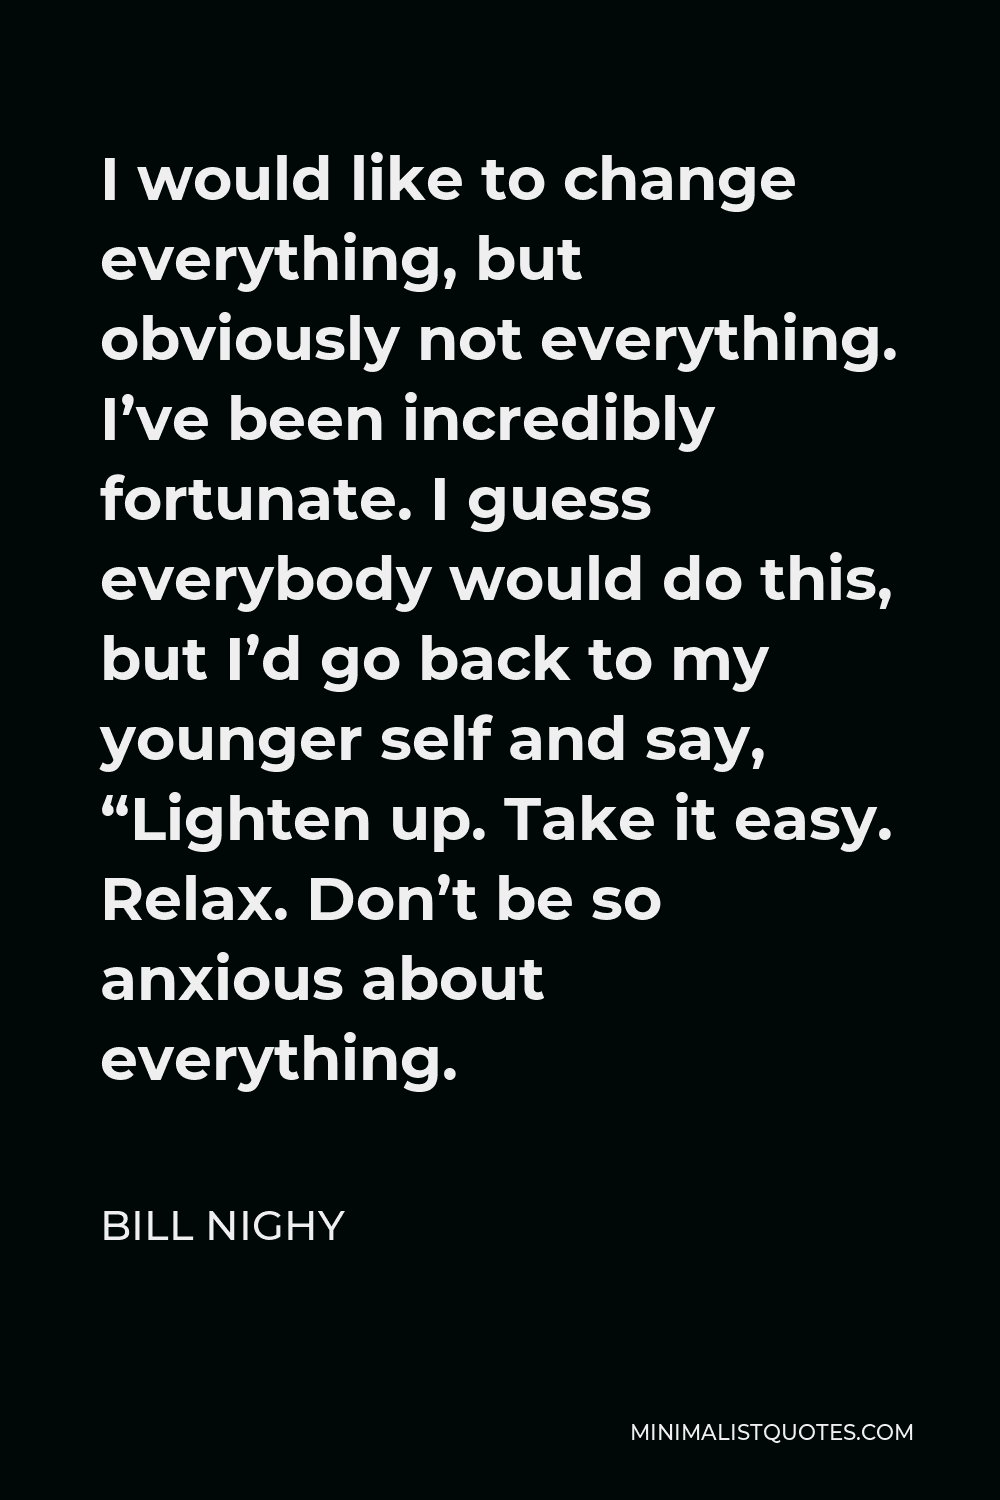 Bill Nighy Quote - I would like to change everything, but obviously not everything. I’ve been incredibly fortunate. I guess everybody would do this, but I’d go back to my younger self and say, “Lighten up. Take it easy. Relax. Don’t be so anxious about everything.